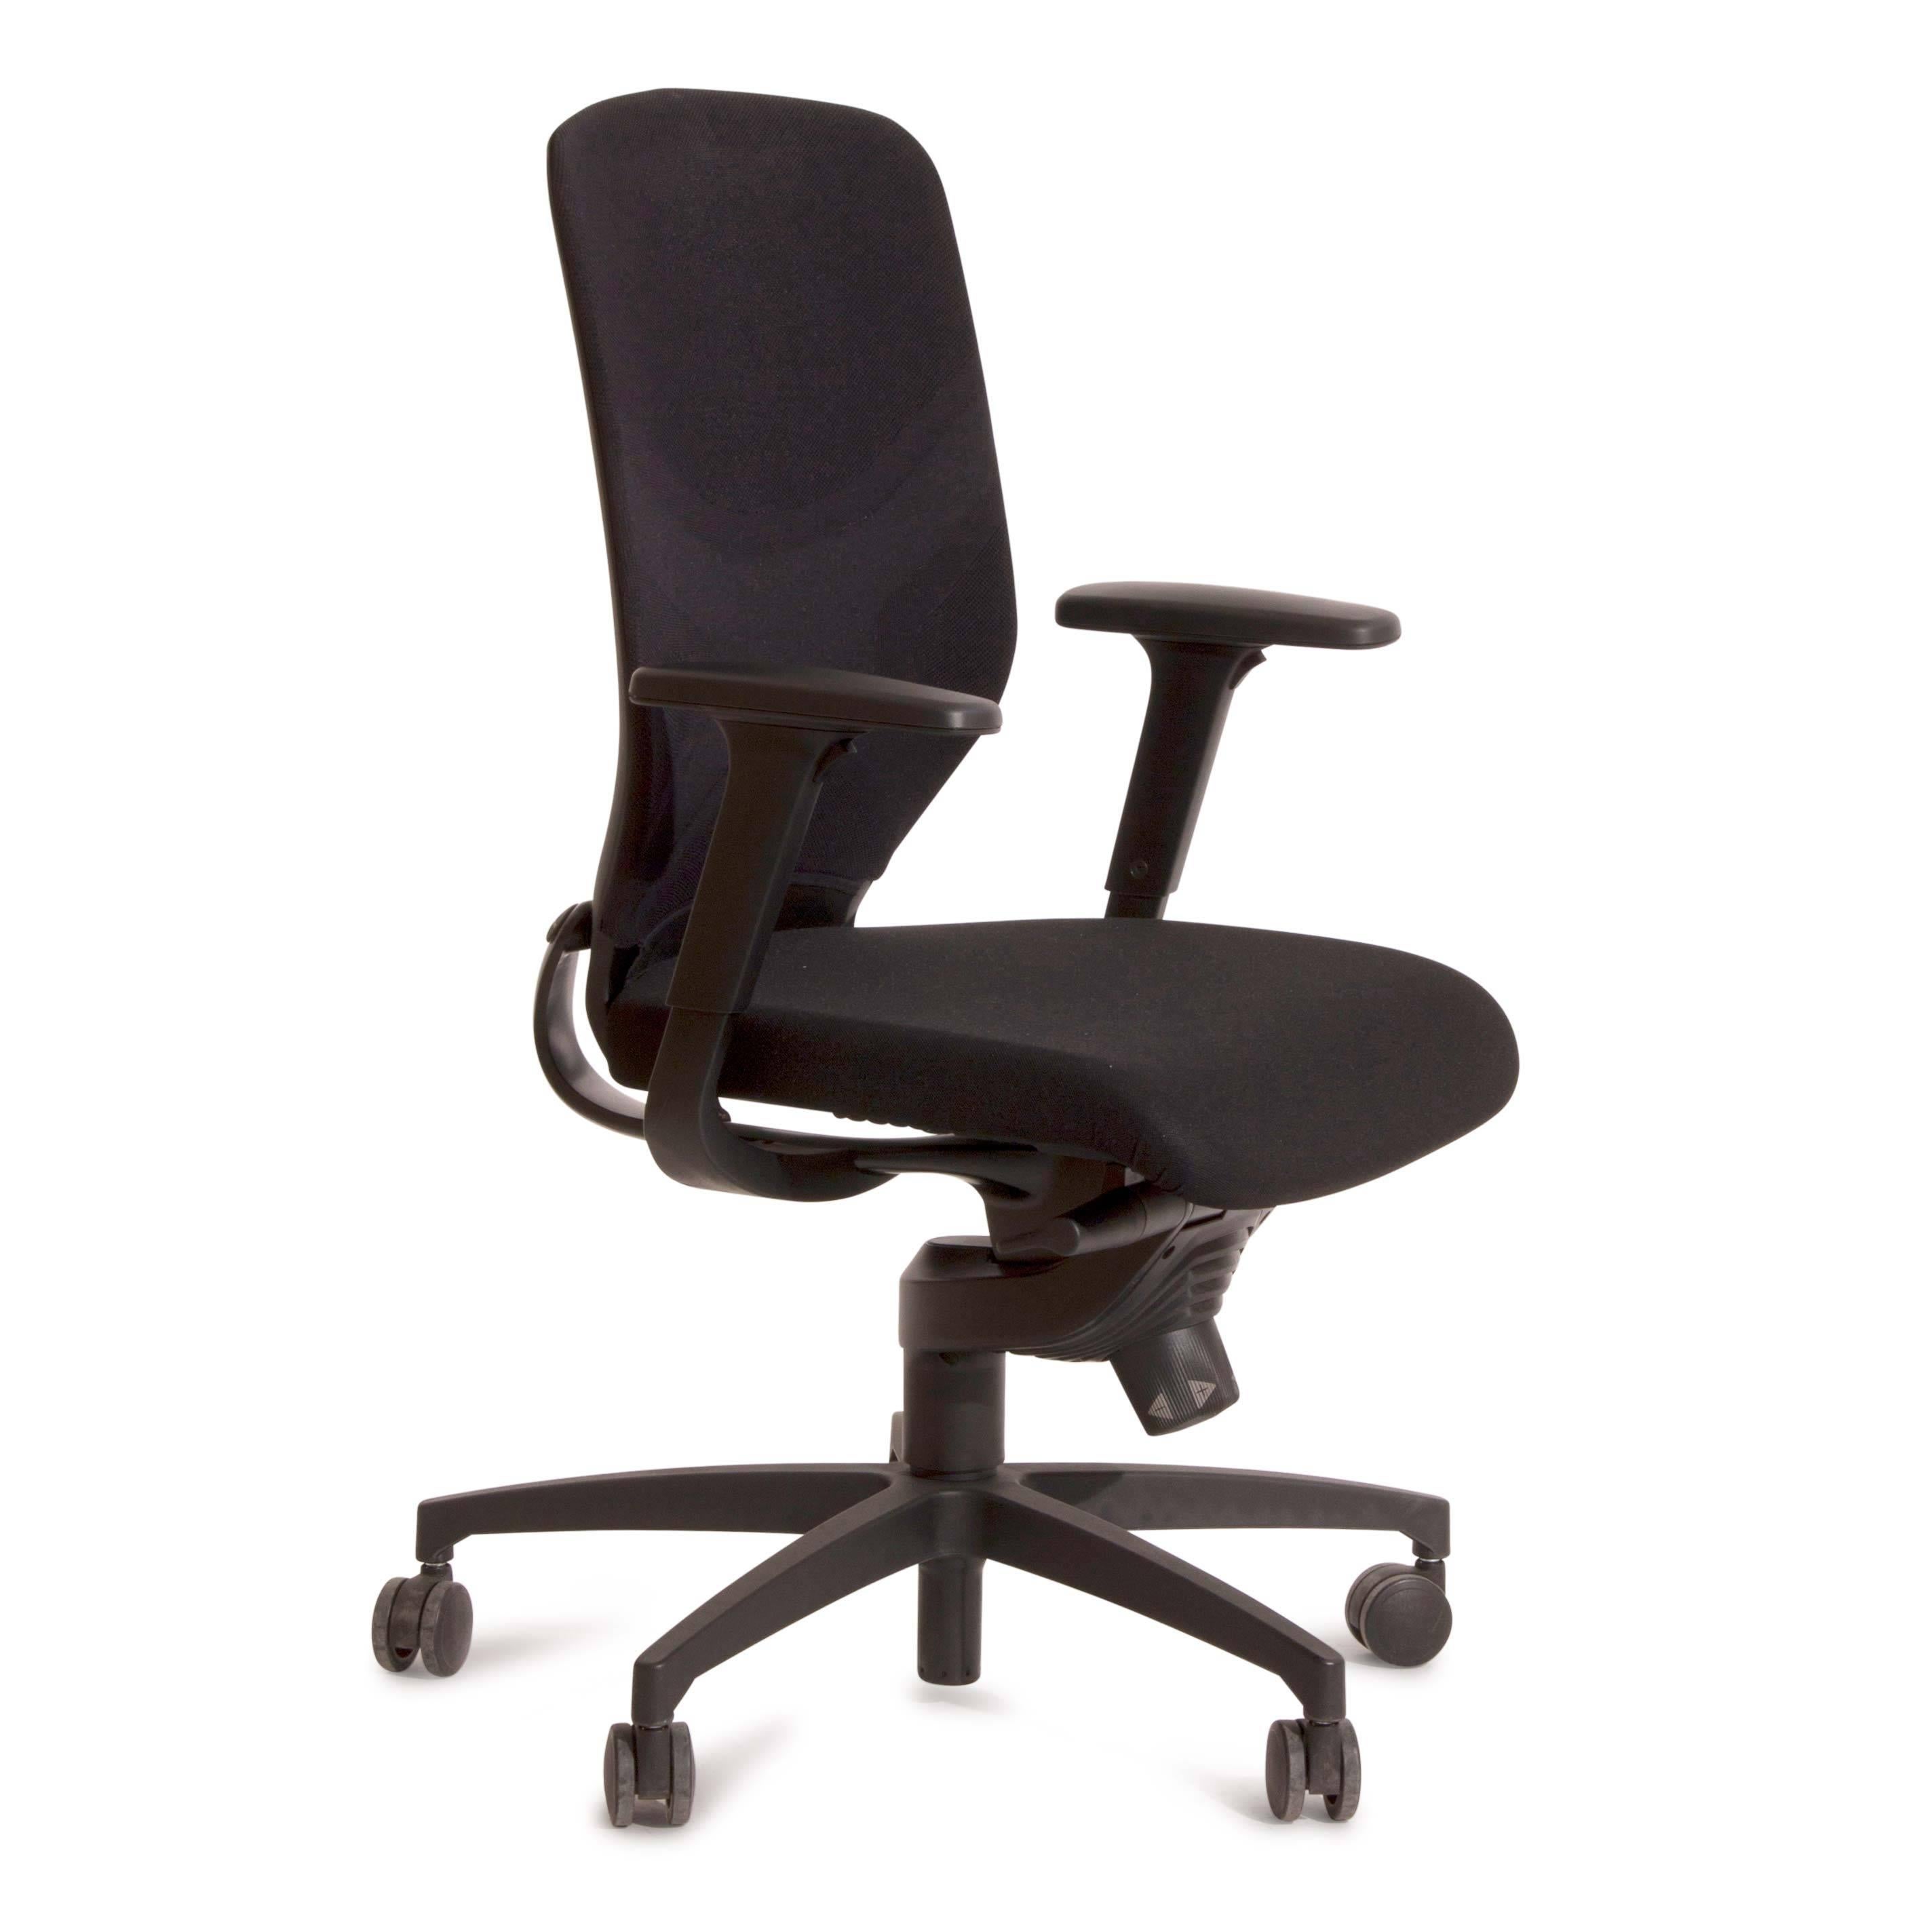 For our latest office chair range IN, our engineers have succeeded in adapting Trimension® for the upper medium-price category. More compact, more straightforward and even more dynamic, IN offers a unique combination of natural, three dimensional